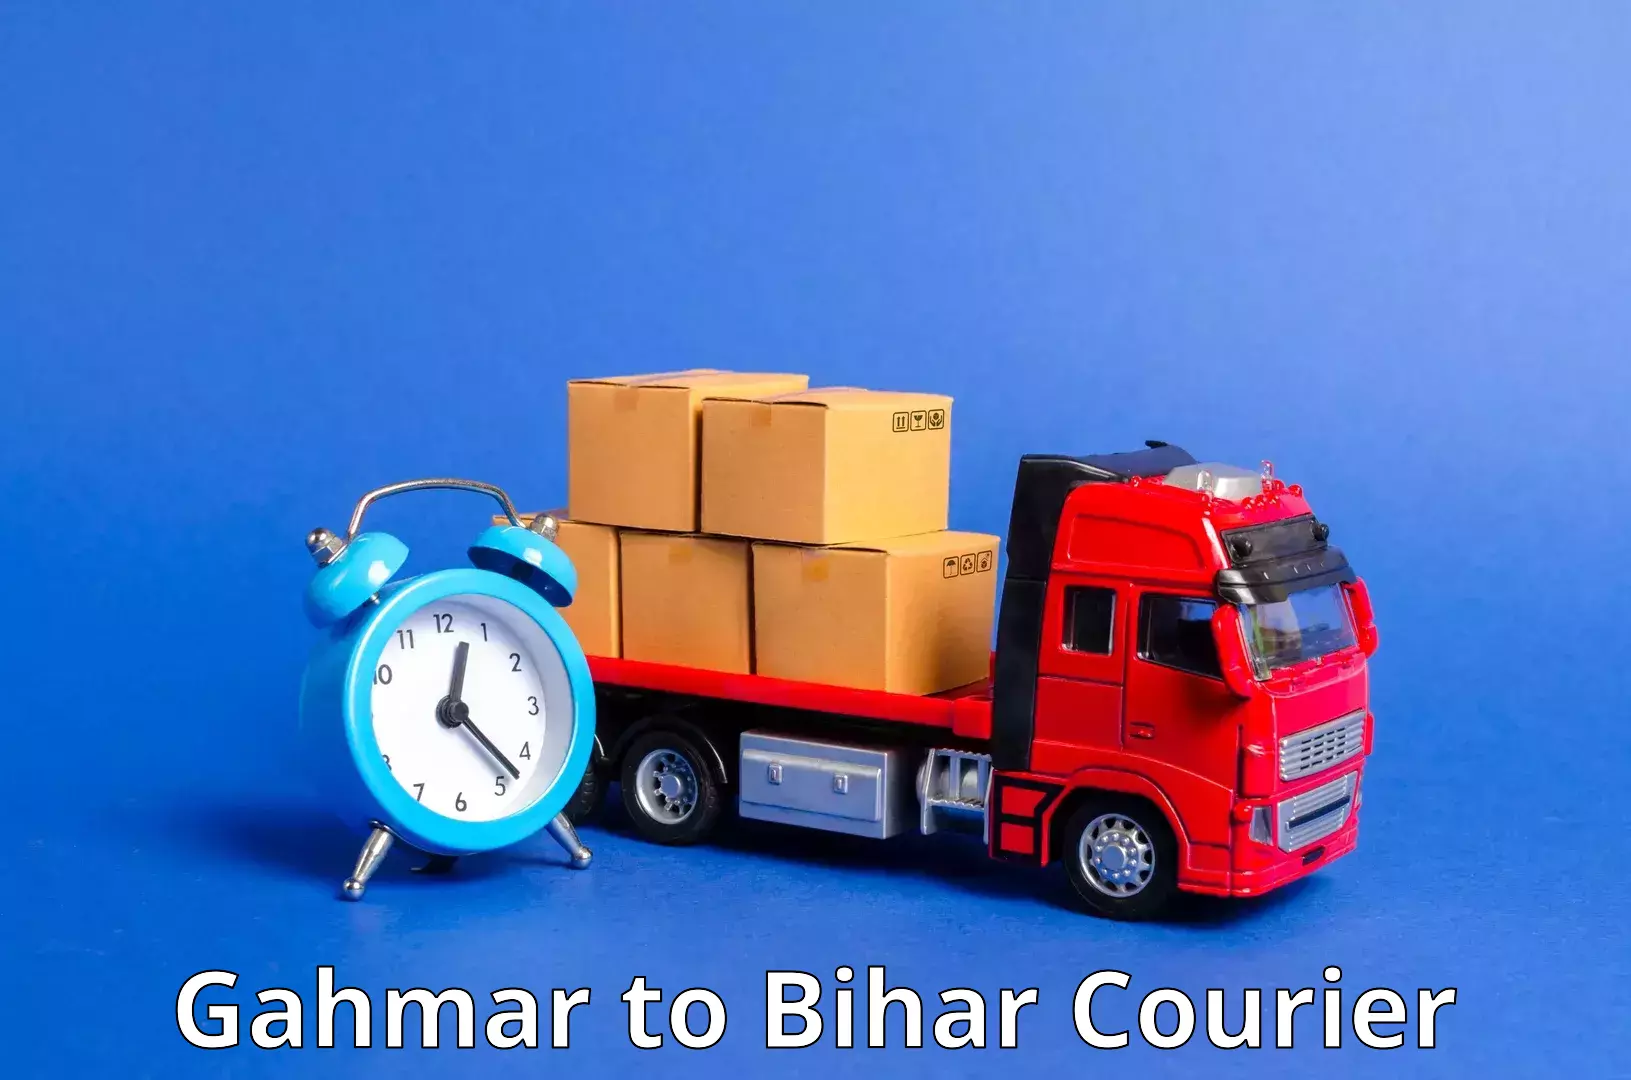 Express delivery capabilities Gahmar to Bihar